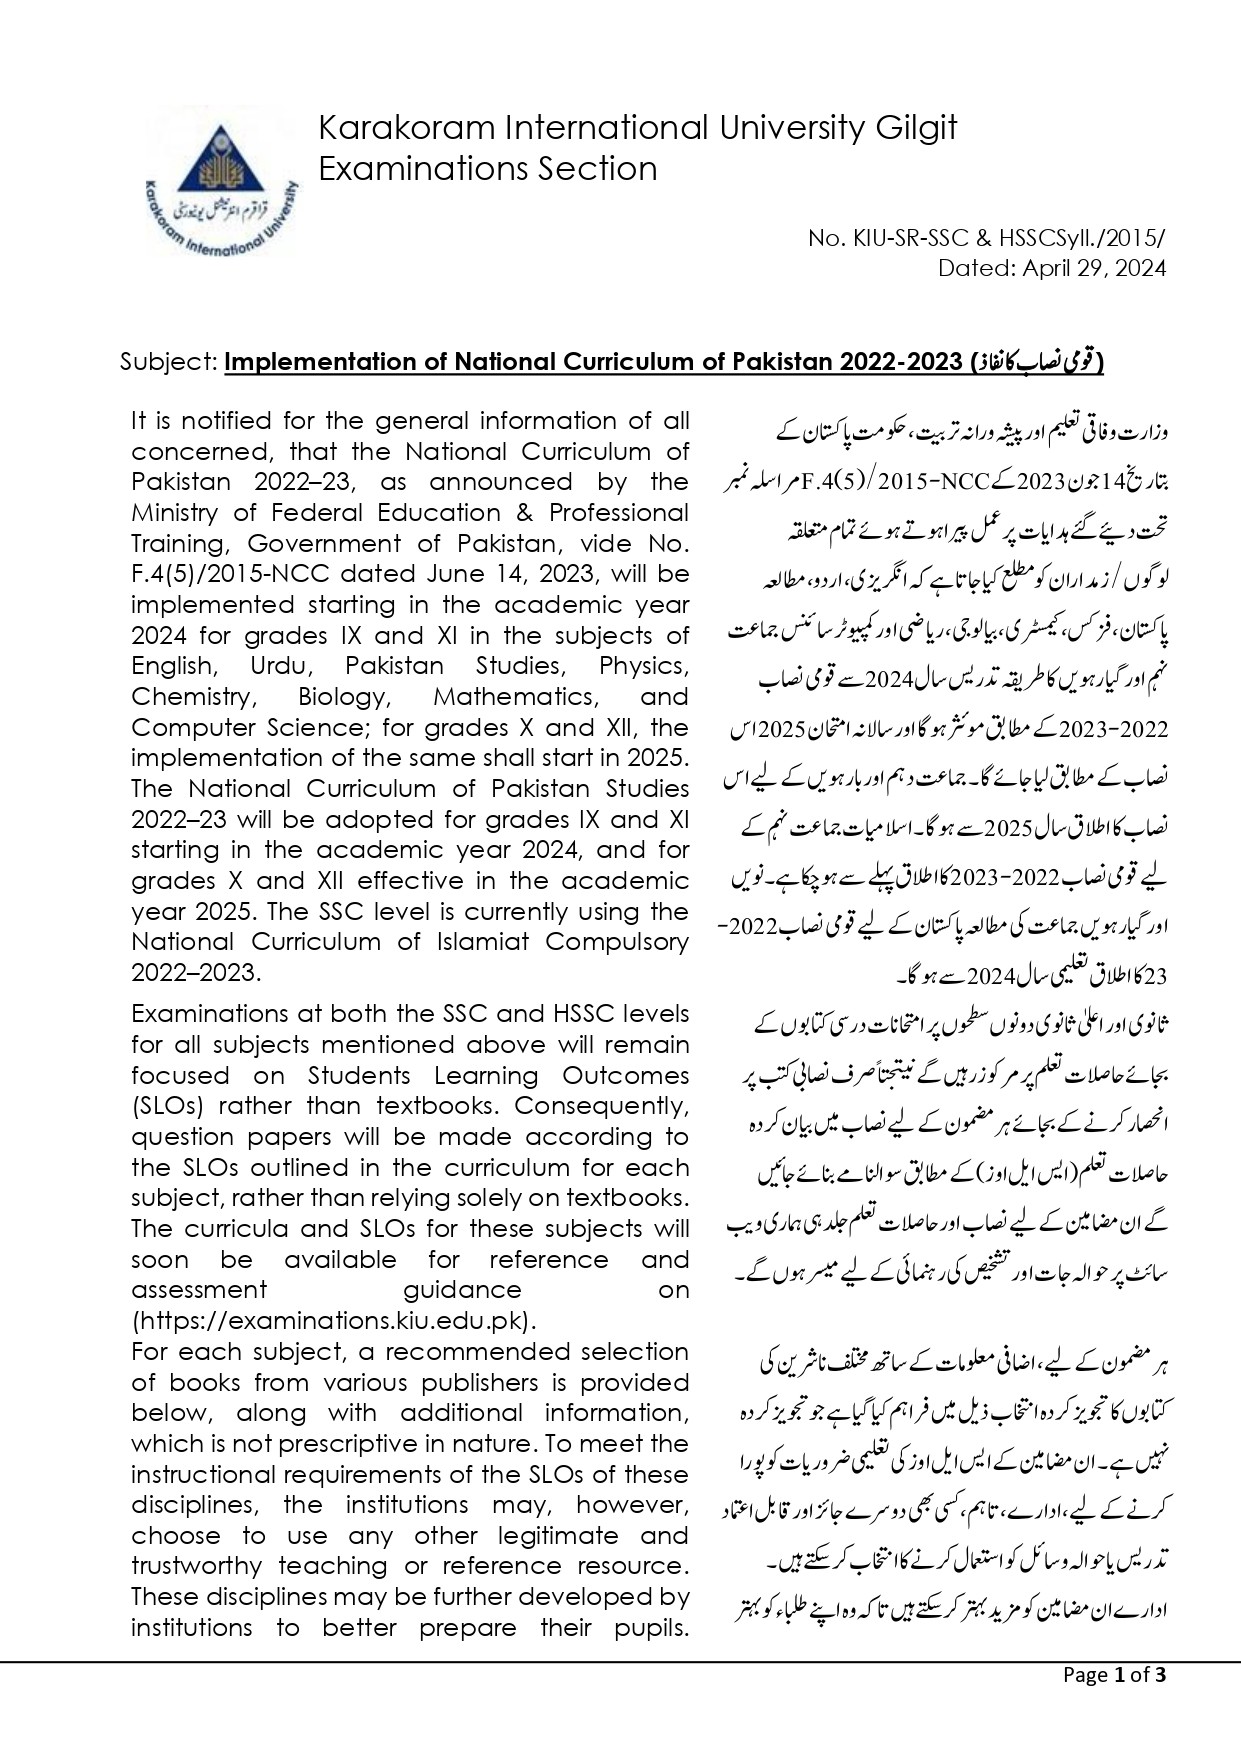 Implementation of National Curriculum of Pakistan 2022-2023 Page 1